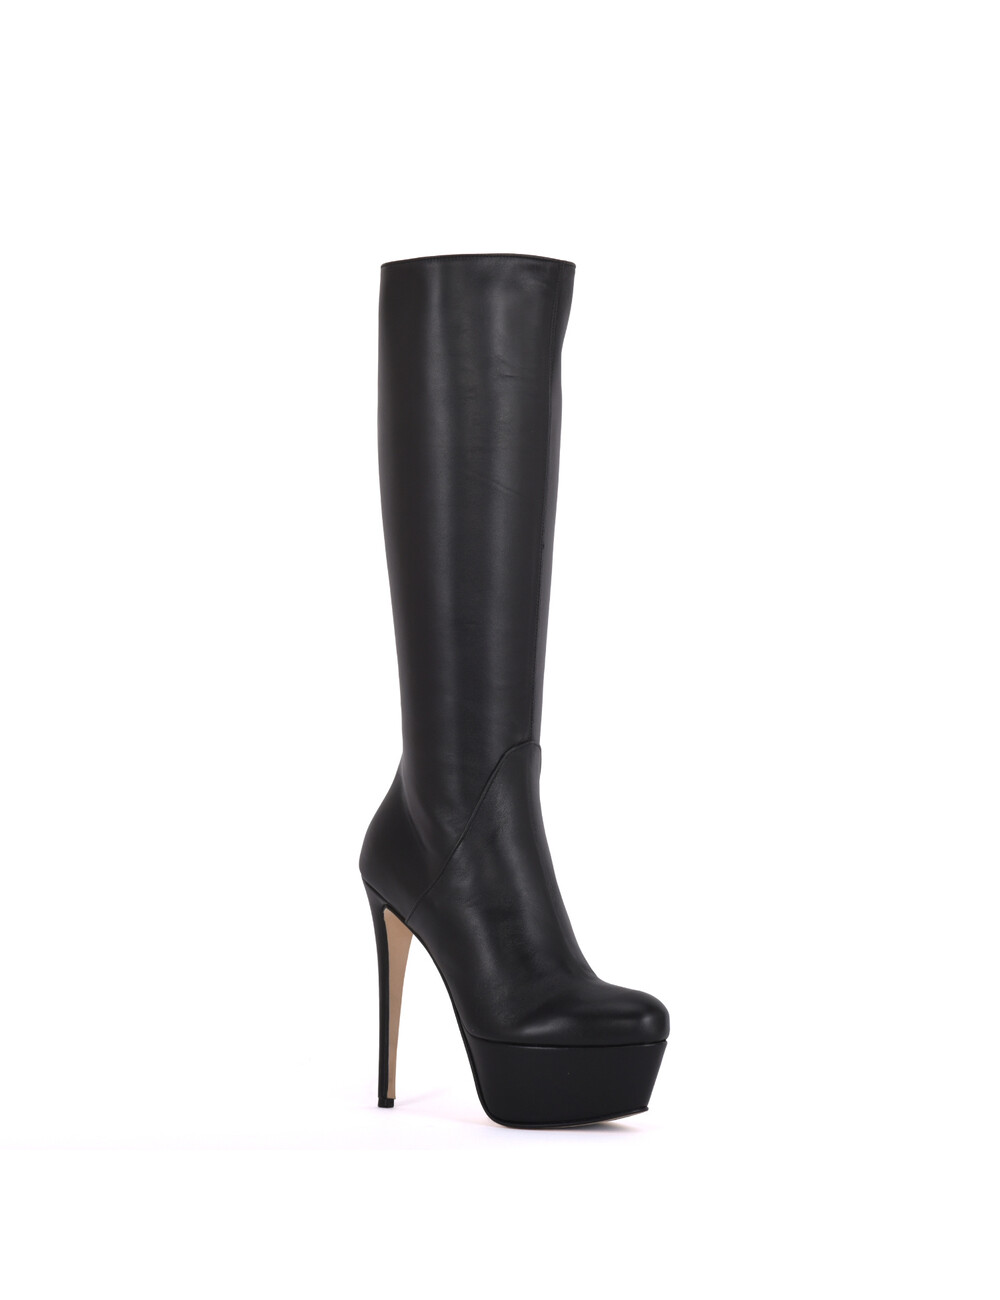 Sanctum High Italian knee boots ISIS with platform heels in real leather